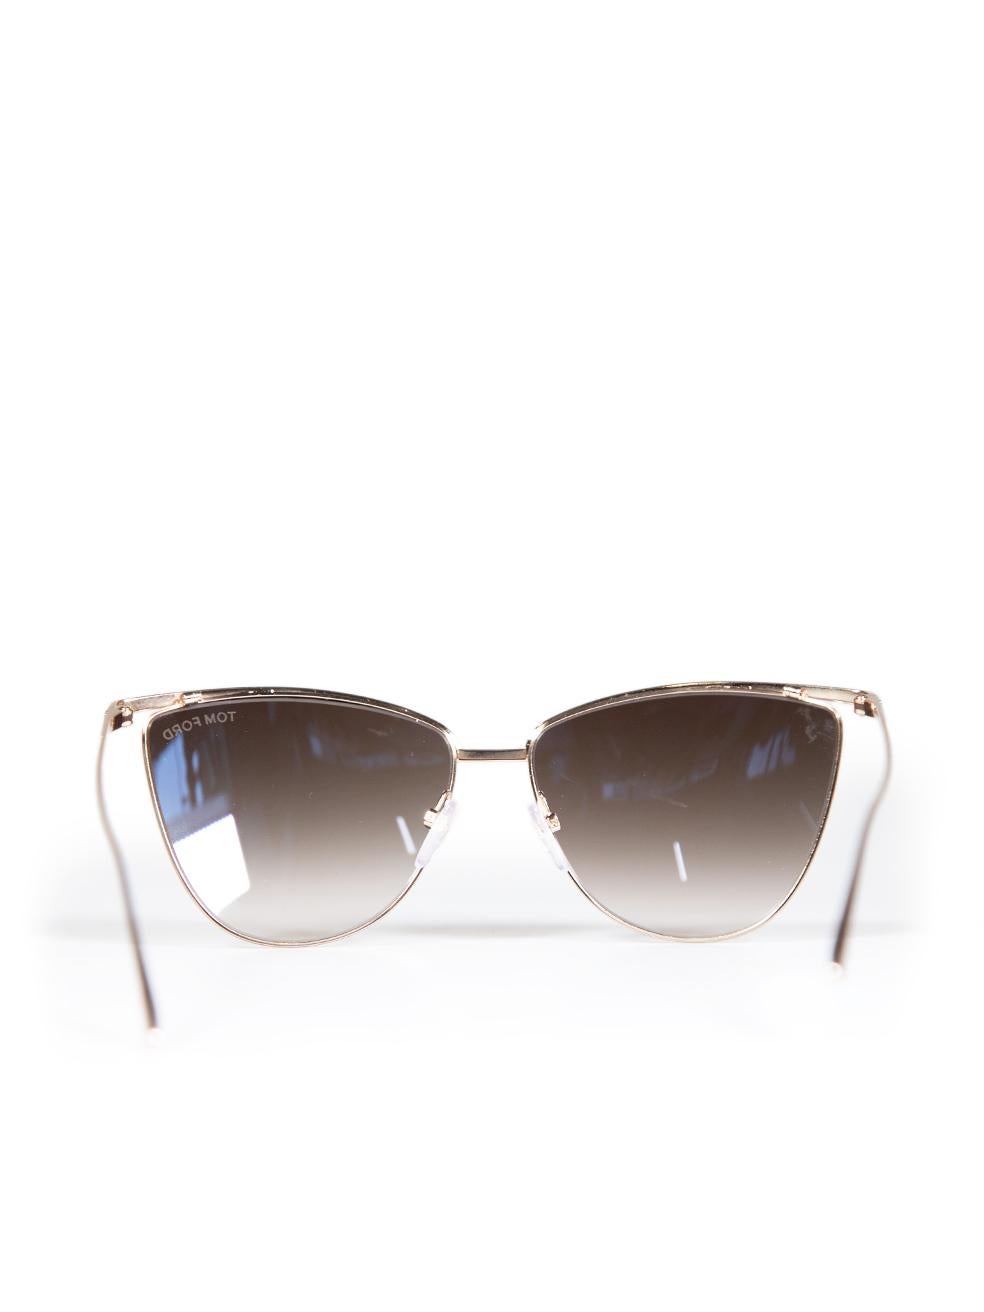 Women's Tom Ford Shiny Rose Gold Veronica Sunglasses For Sale